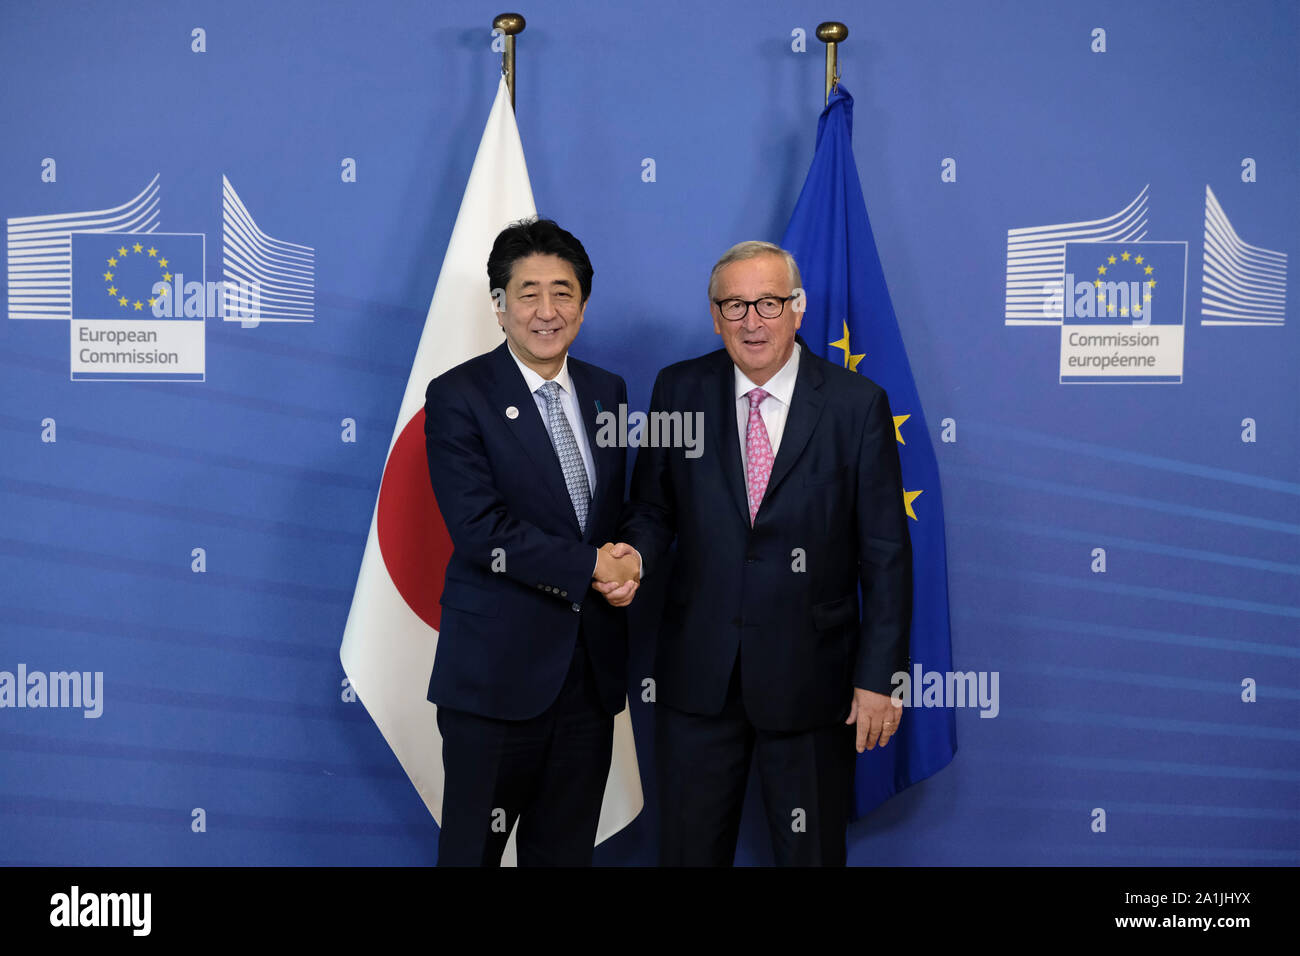 Brussels, Belgium. 27th September 2019. EU Commission President Jean-Claude Juncker (R) welcomes Japan's Prime Minister Shinzo Abe (L) ahead of a working lunch. Credit: ALEXANDROS MICHAILIDIS/Alamy Live News Stock Photo